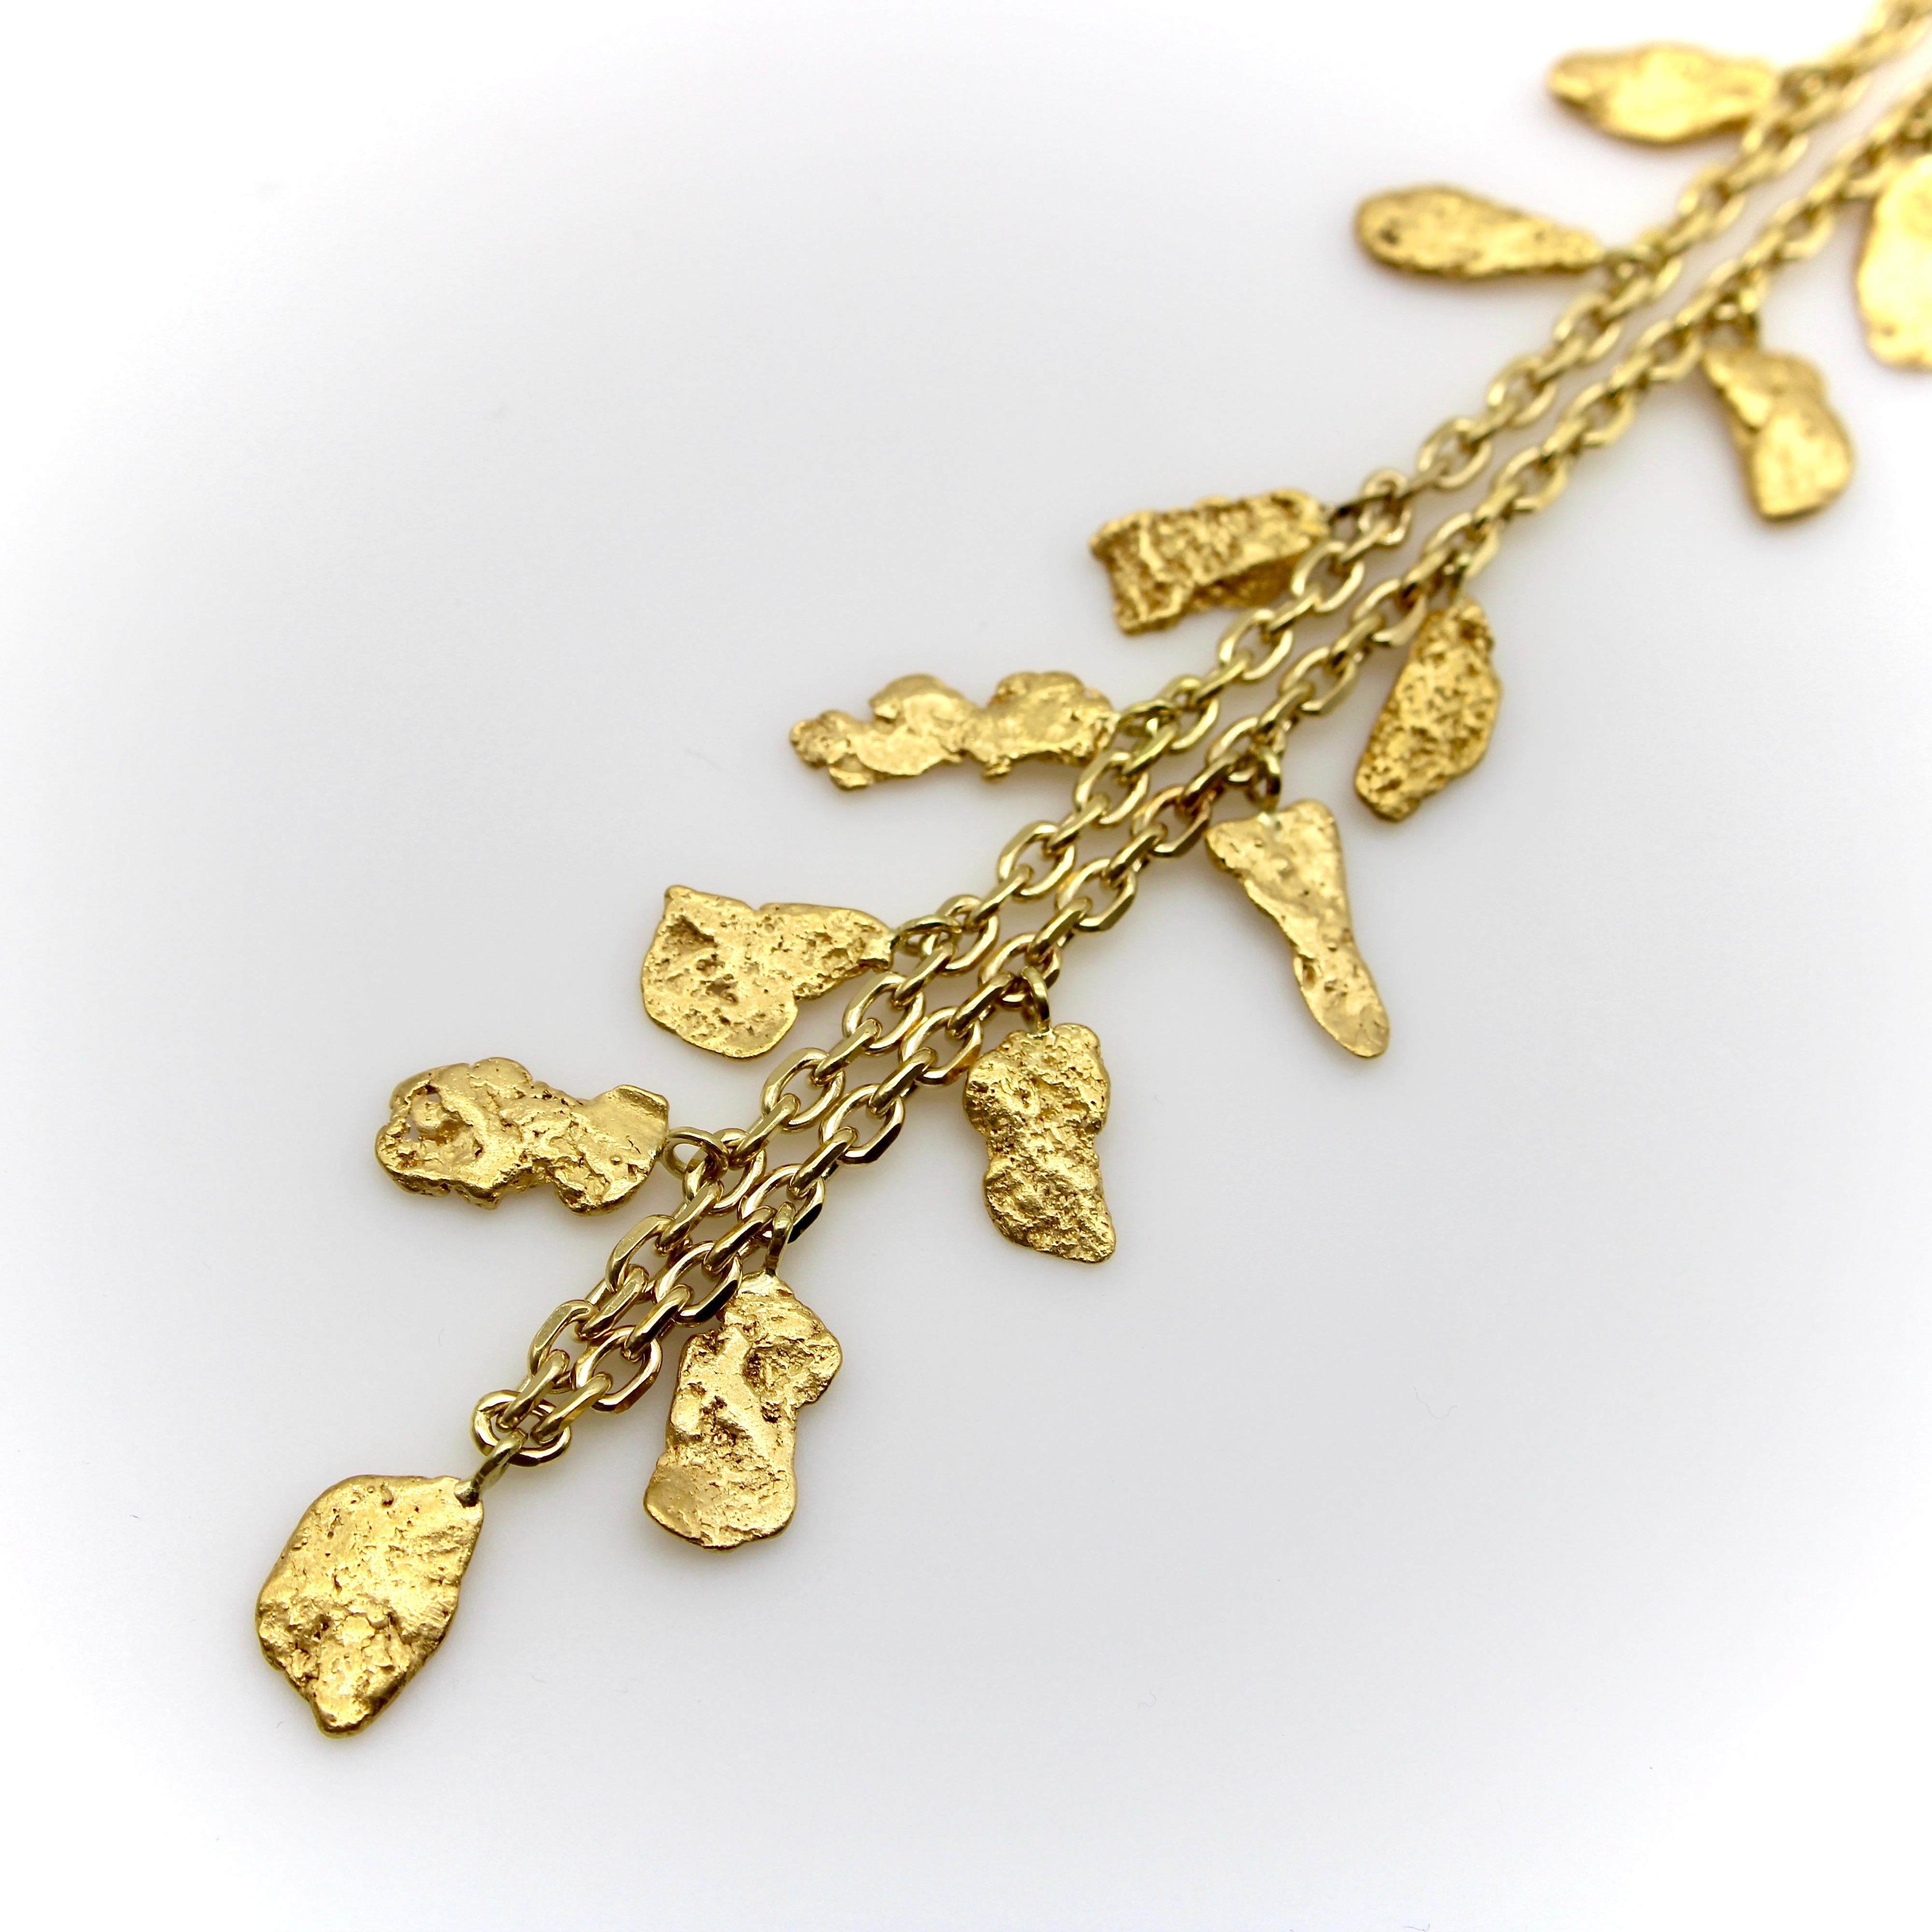 This 18k gold Italian chain contains a selection of stunning 22-24k gold nuggets. The nuggets graduate in size, with the largest nuggets at the center of the chain; each has a unique shape and the variations of sizes and forms complement each other